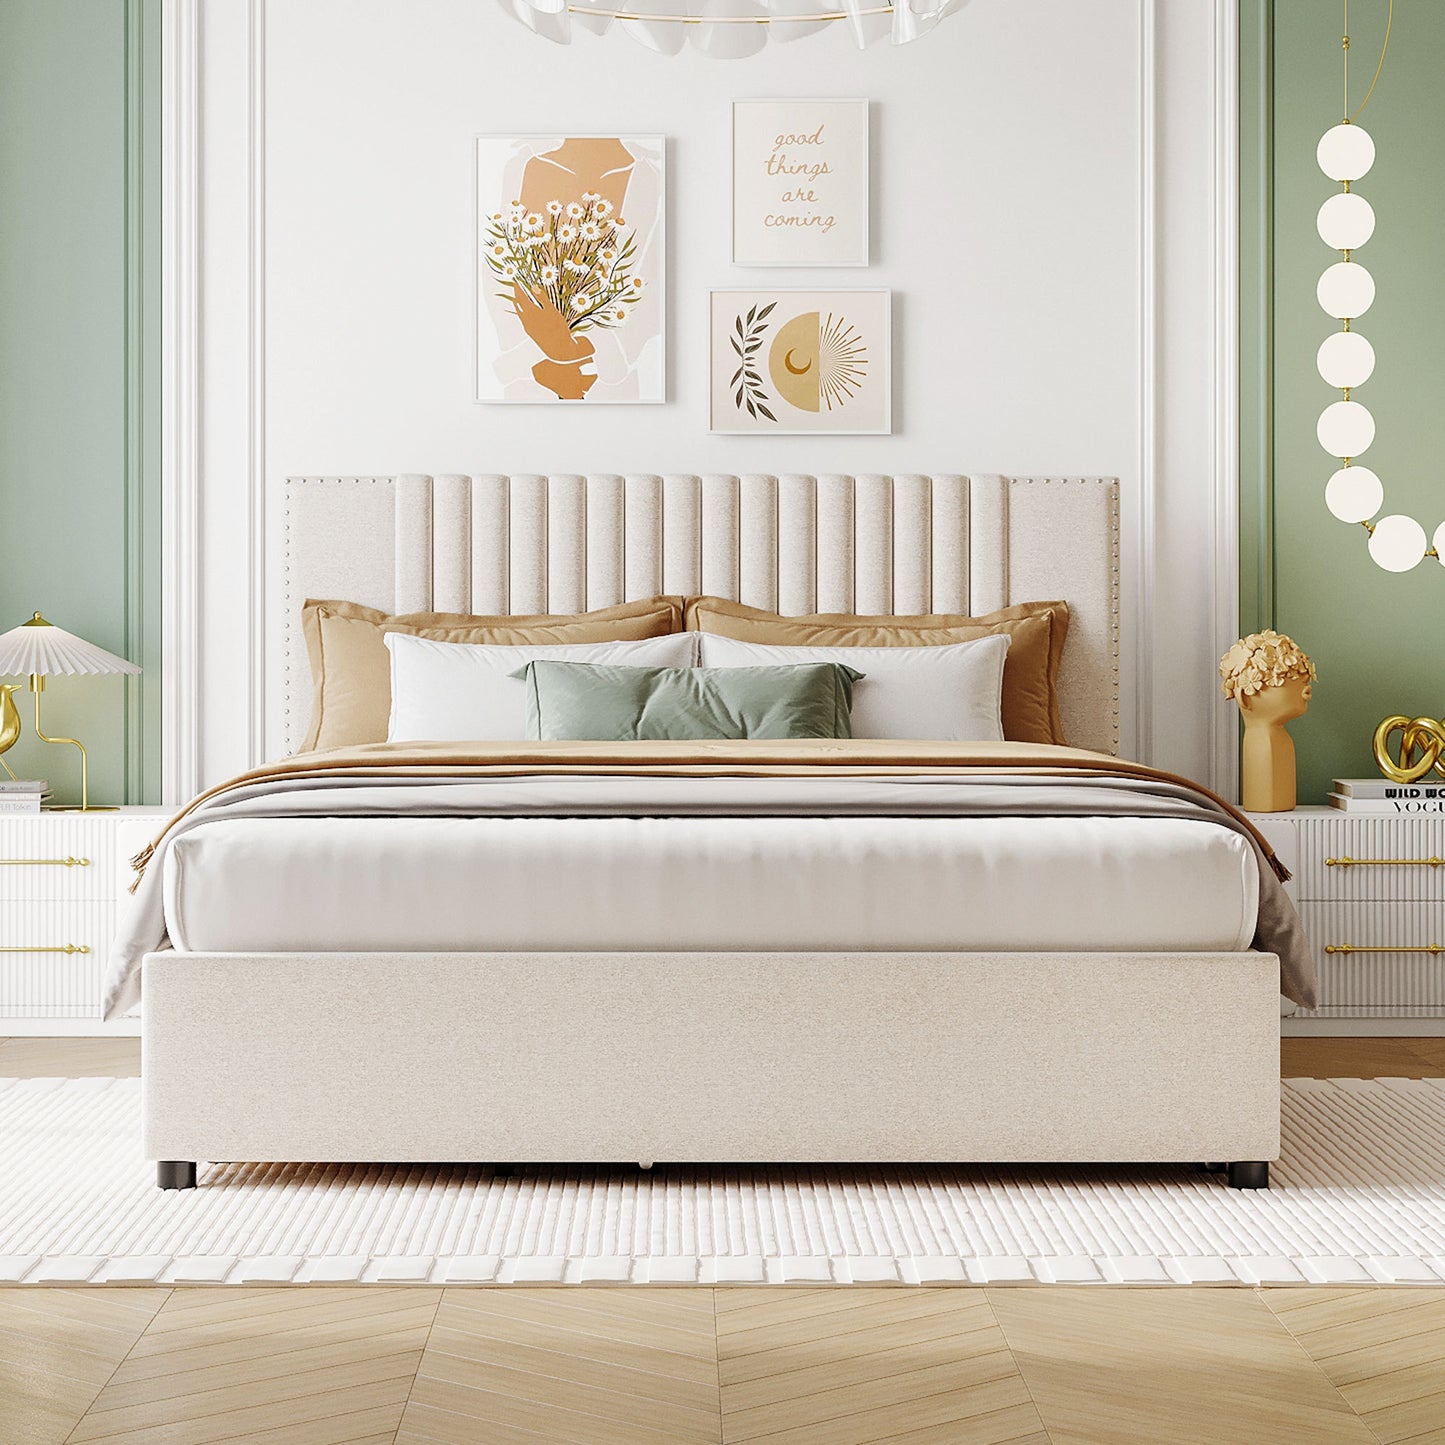 Queen Size Upholstered Platform Bed with 2 Drawers and 1 Twin XL Trundle, Classic Headboard Design, Beige